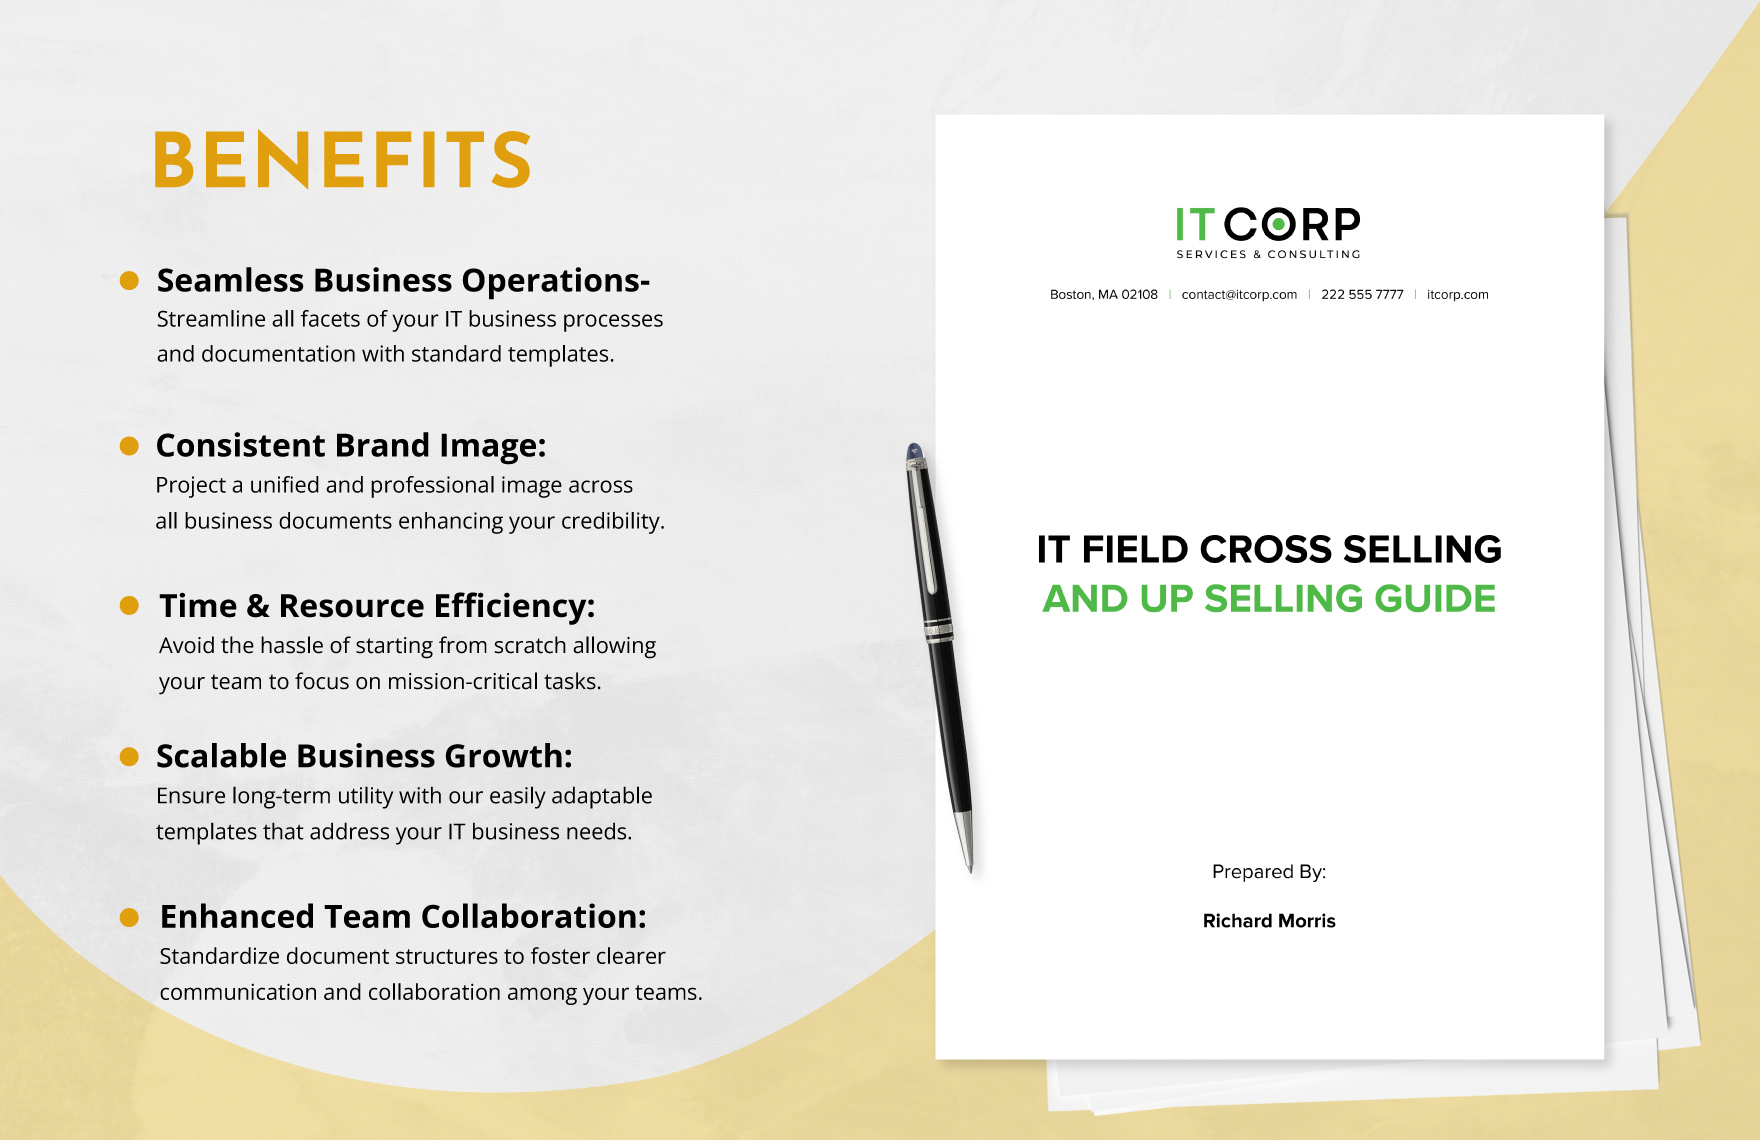 IT Field Cross-selling and Up-selling Guide Template